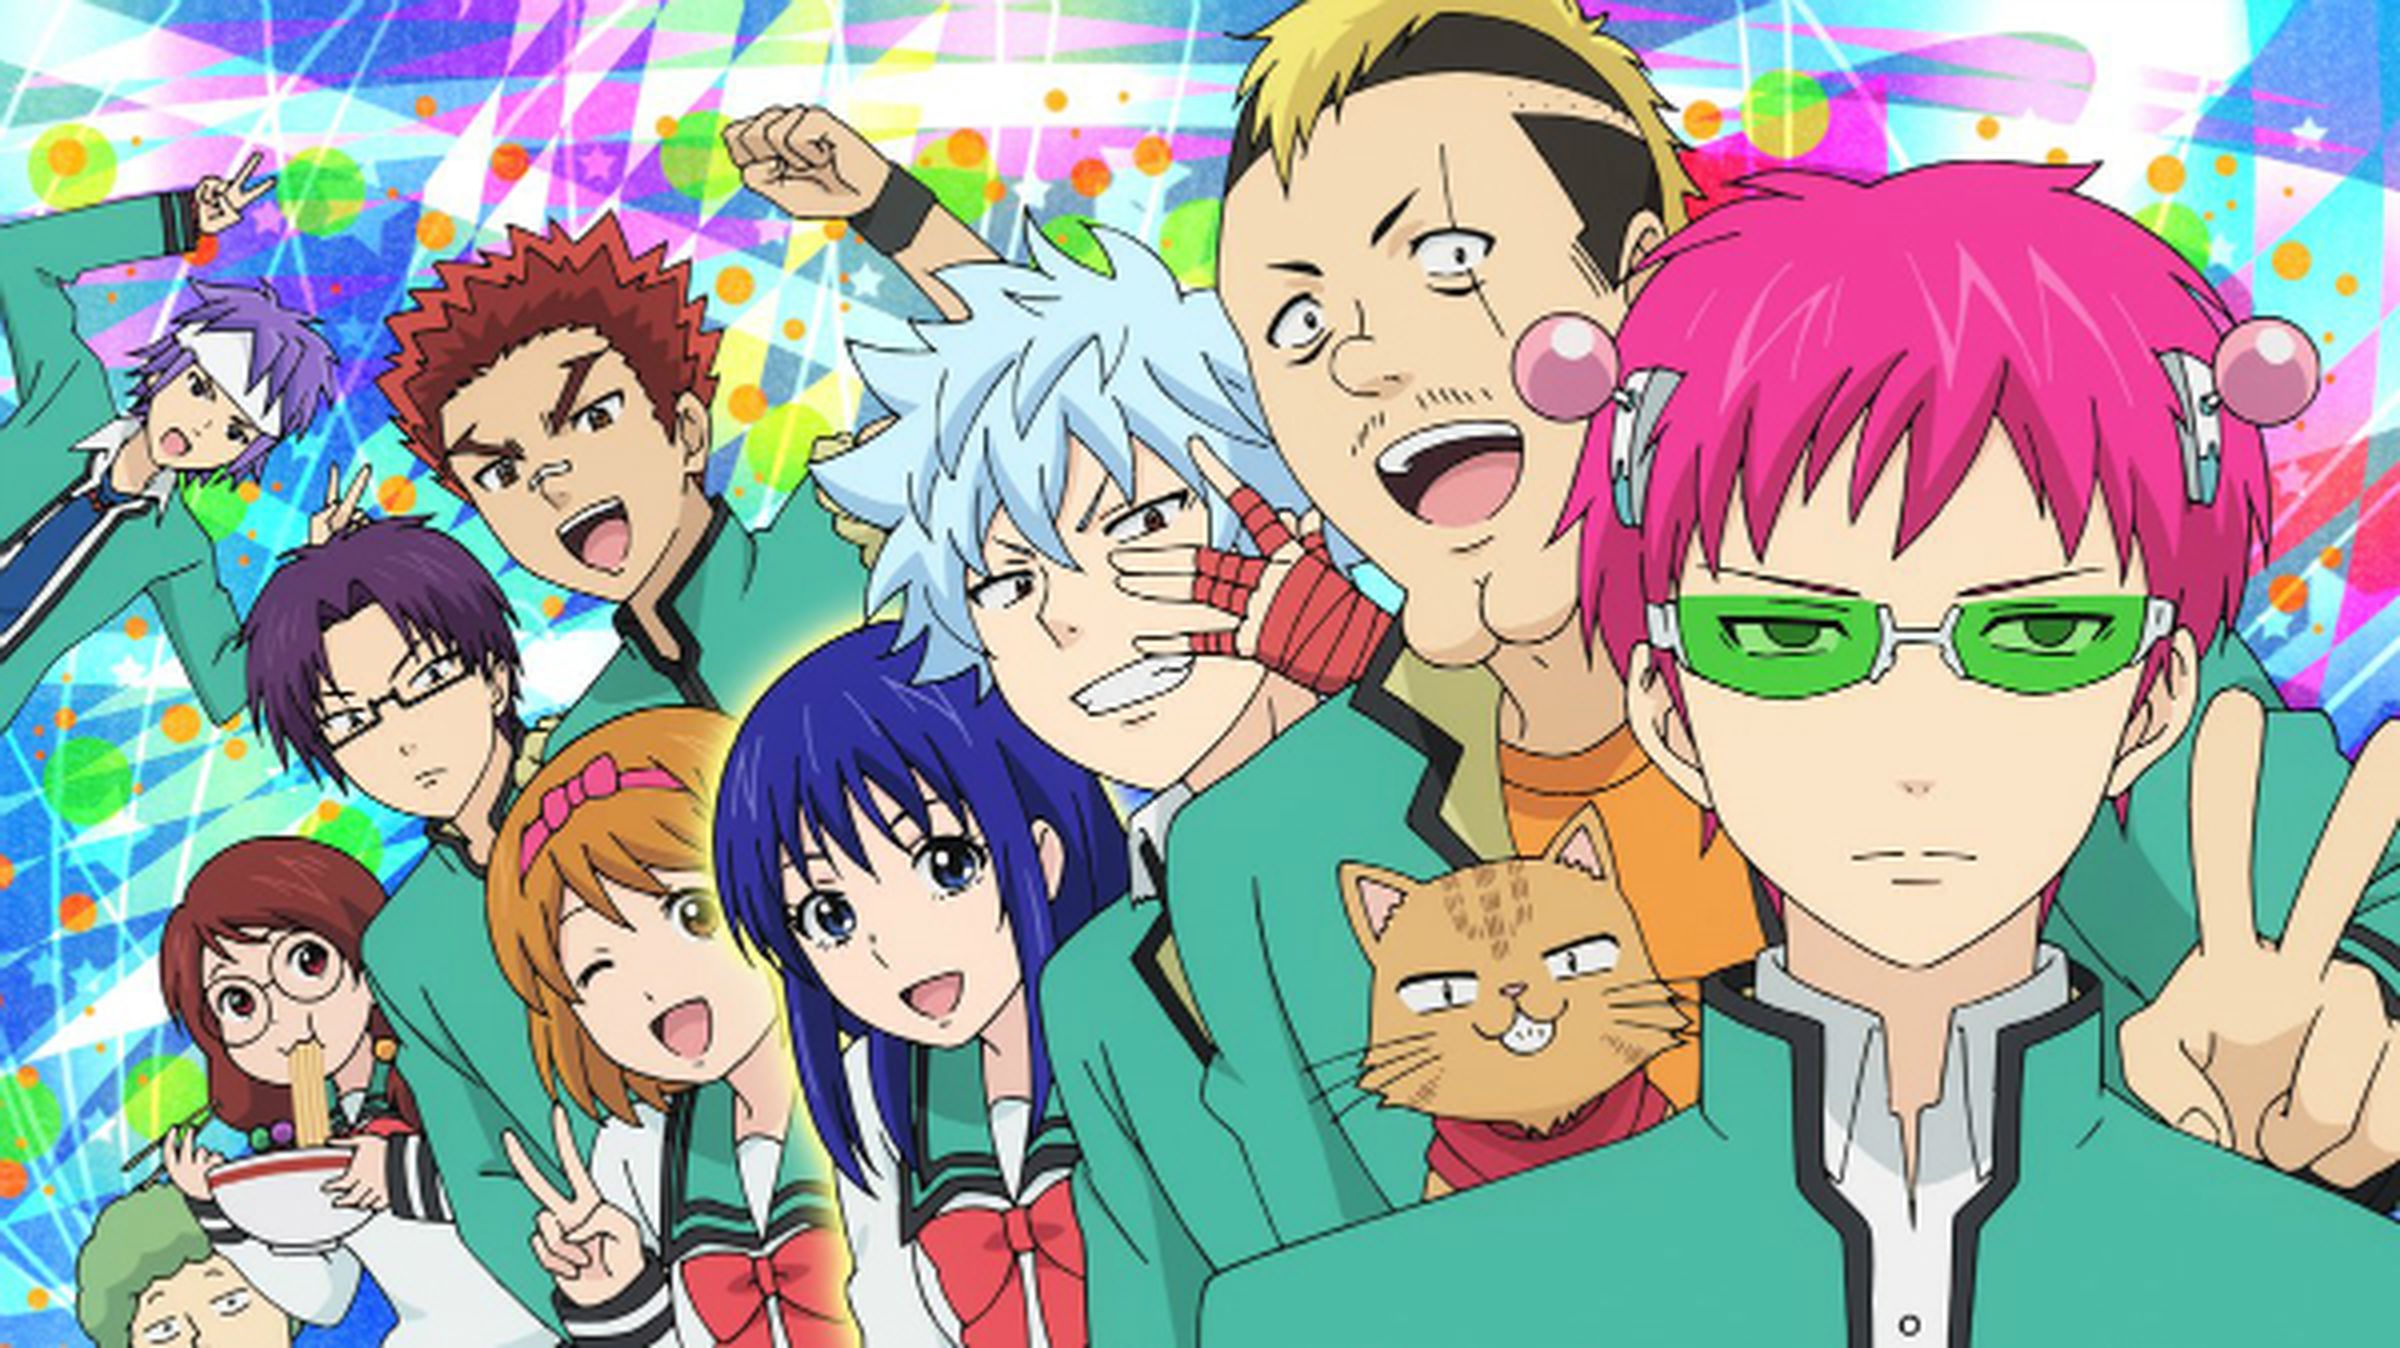 The cast of The Disastrous Life of Saiki K.